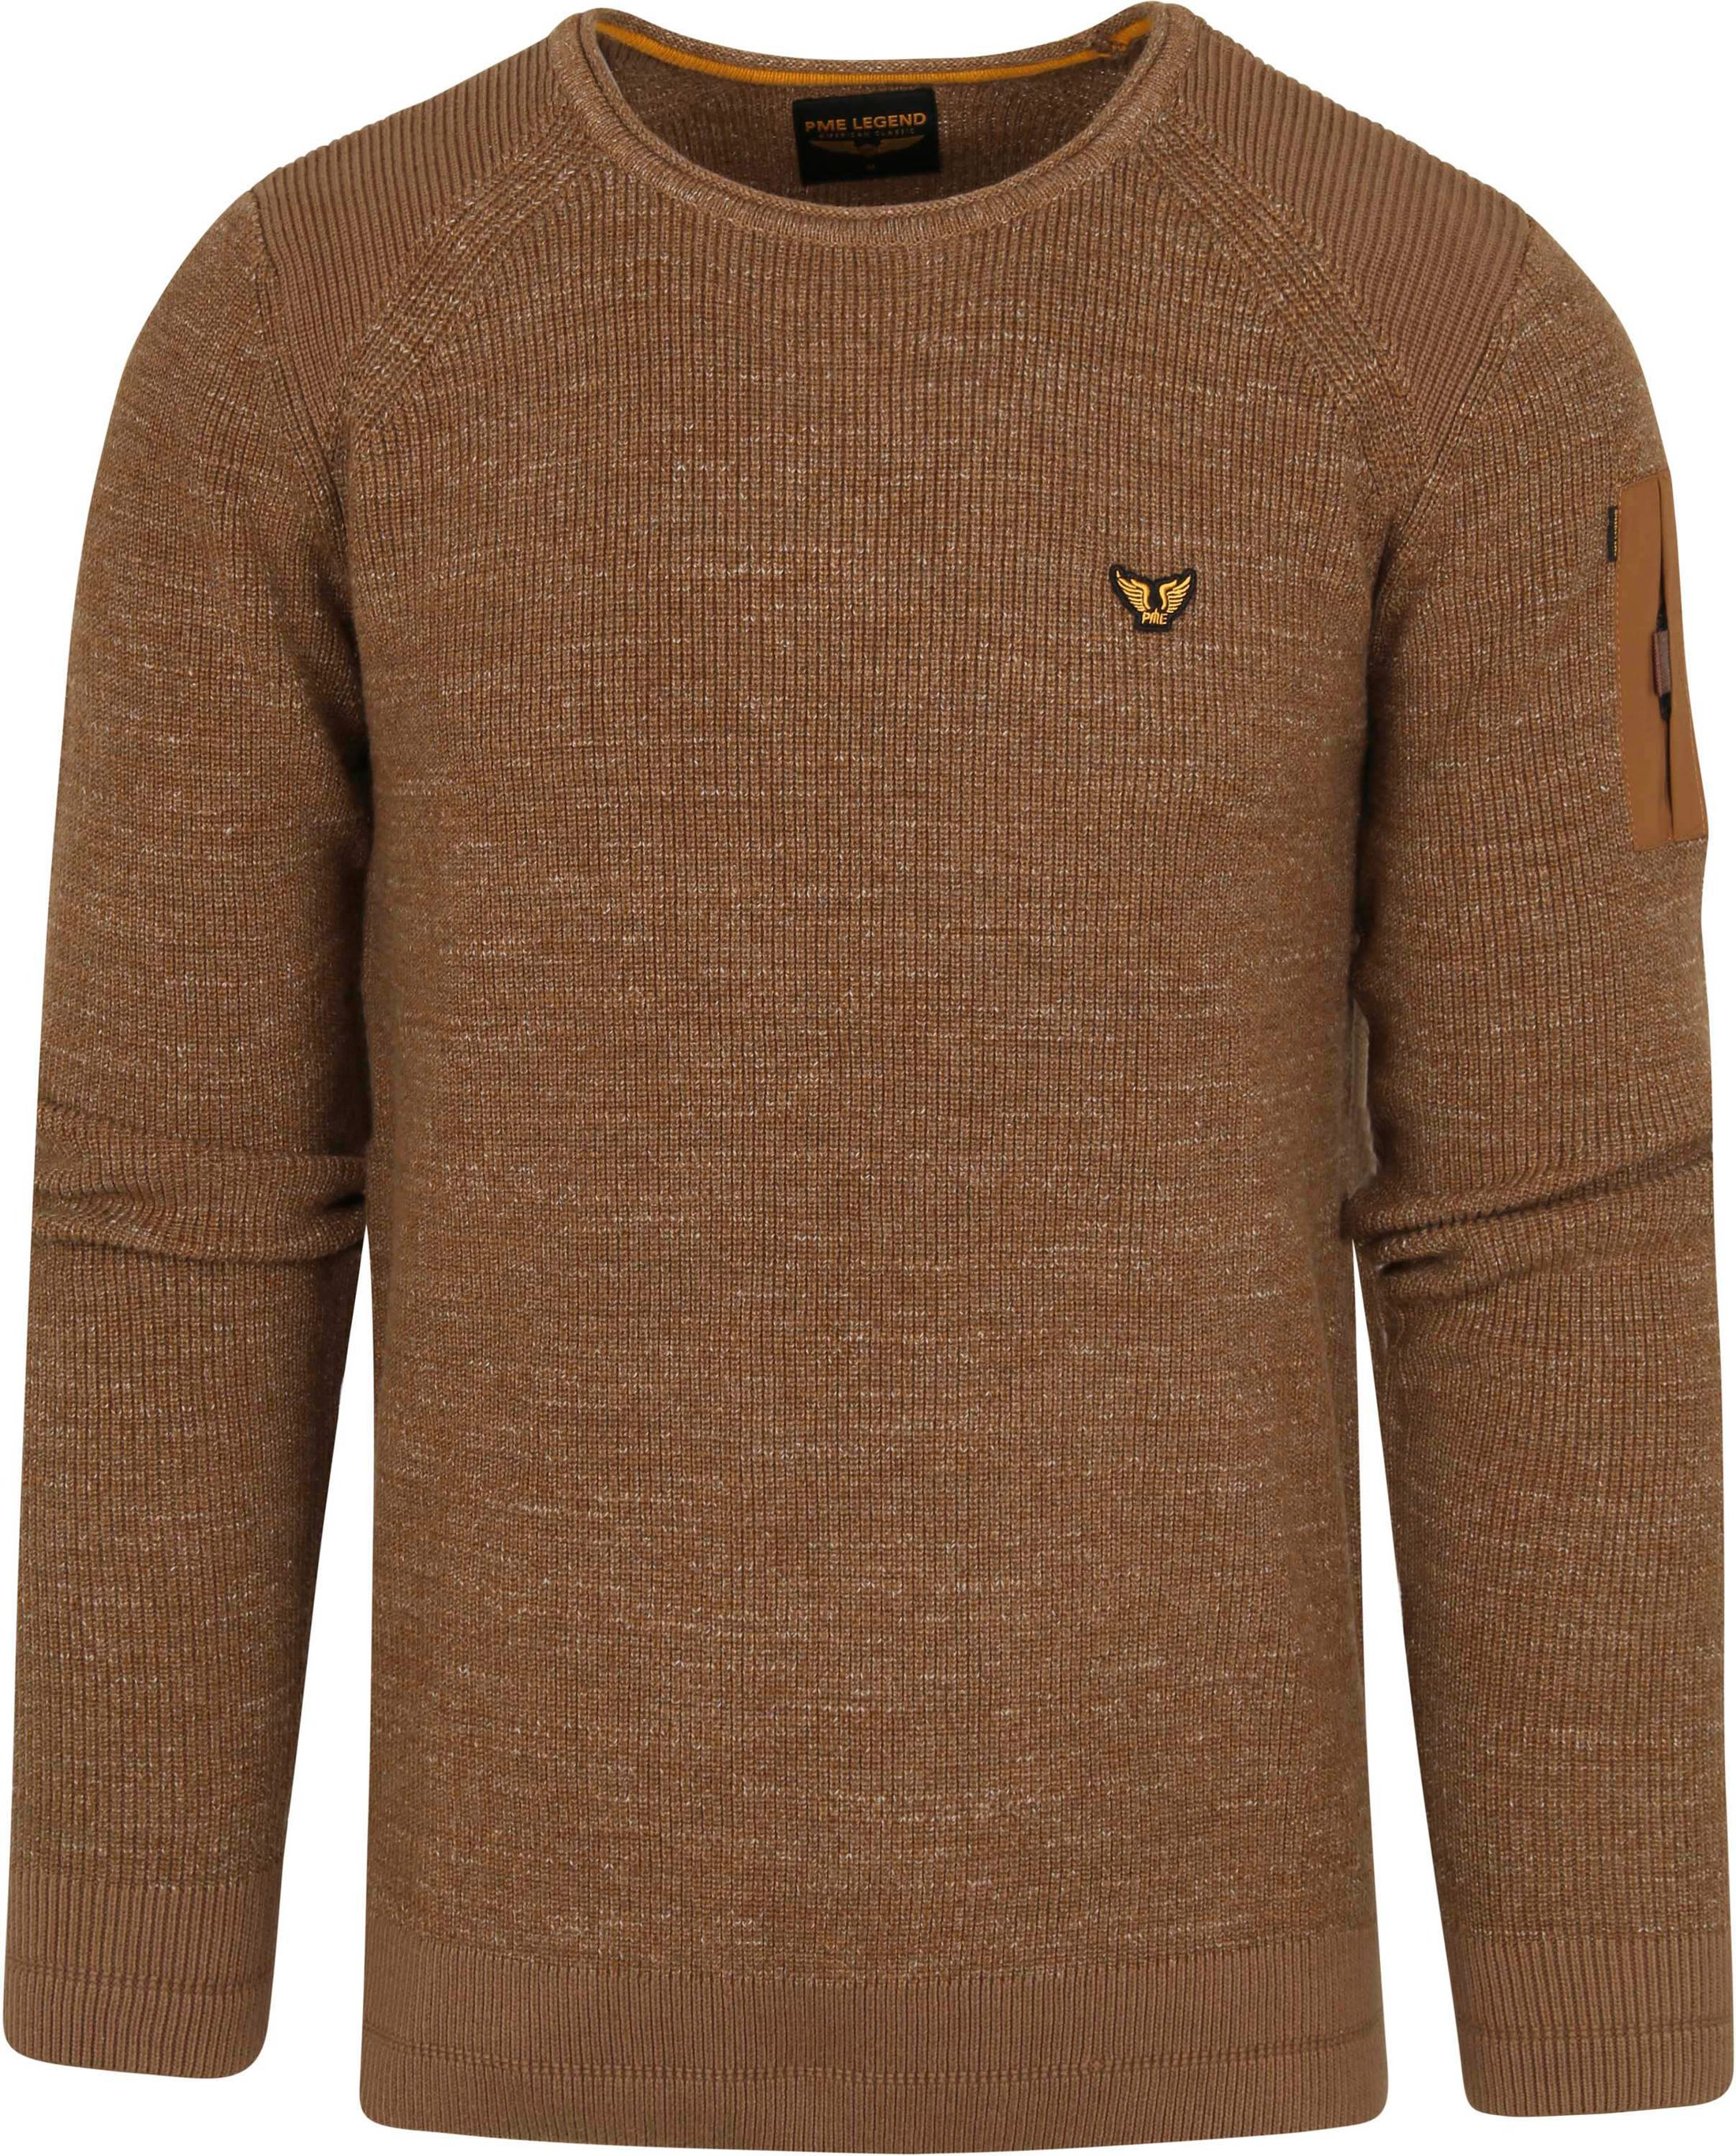 PME Legend Sweater Knitted Brown size 3XL